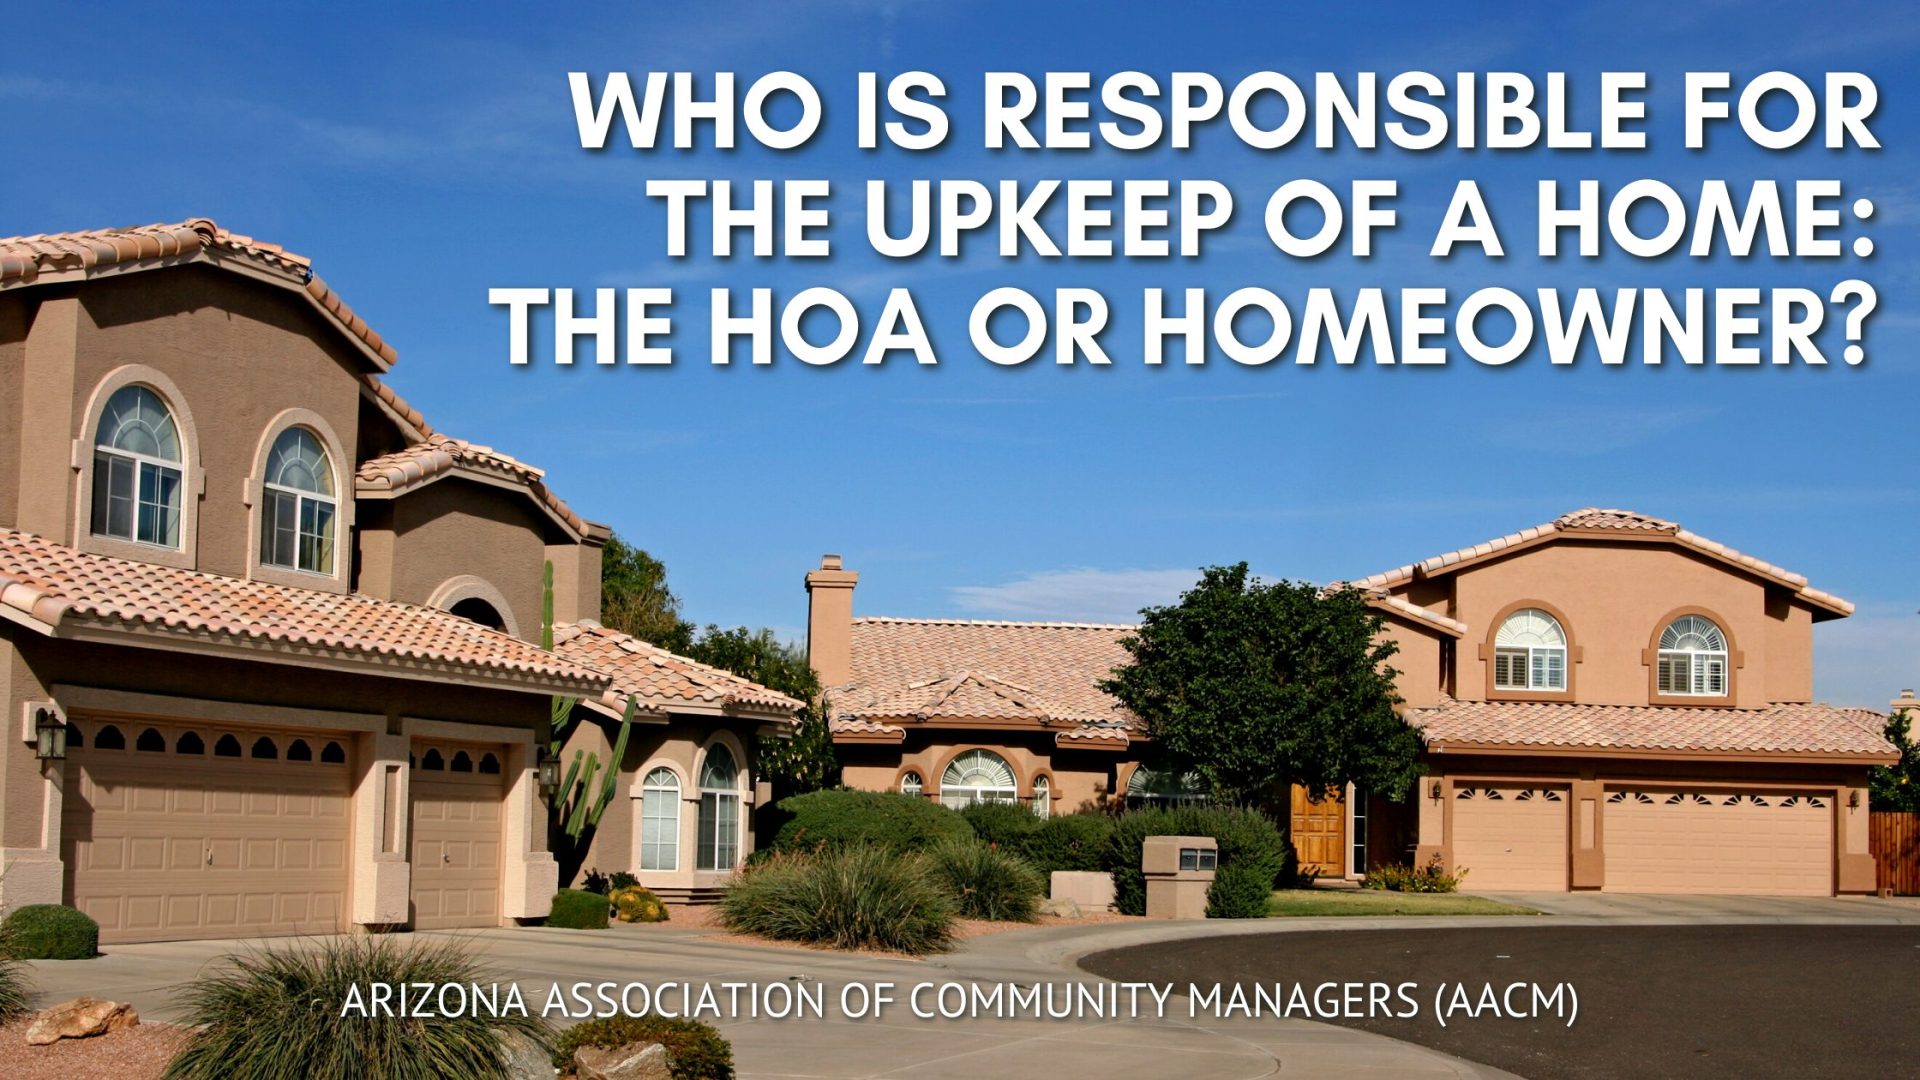 Who Is Responsible for the Upkeep of a Home: The HOA or Homeowner?